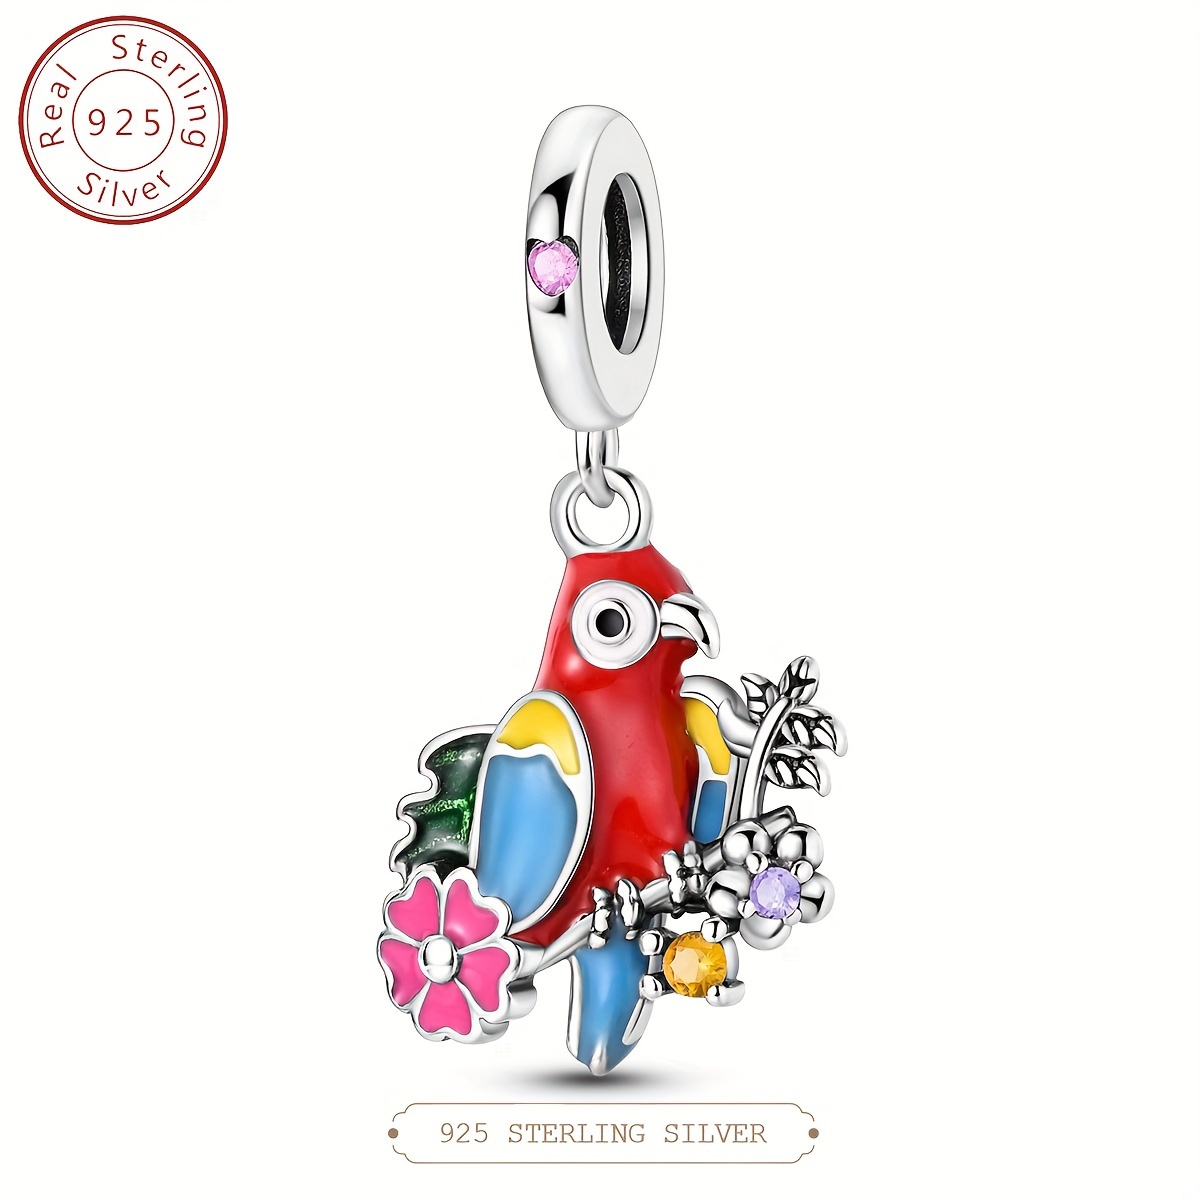 

Colored Enamel S925 925 Sterling Silver Parrot With Flower Dangle Charm Beads Fit For Original Bracelet Bangle Diy Fine Jewelry Making Gift